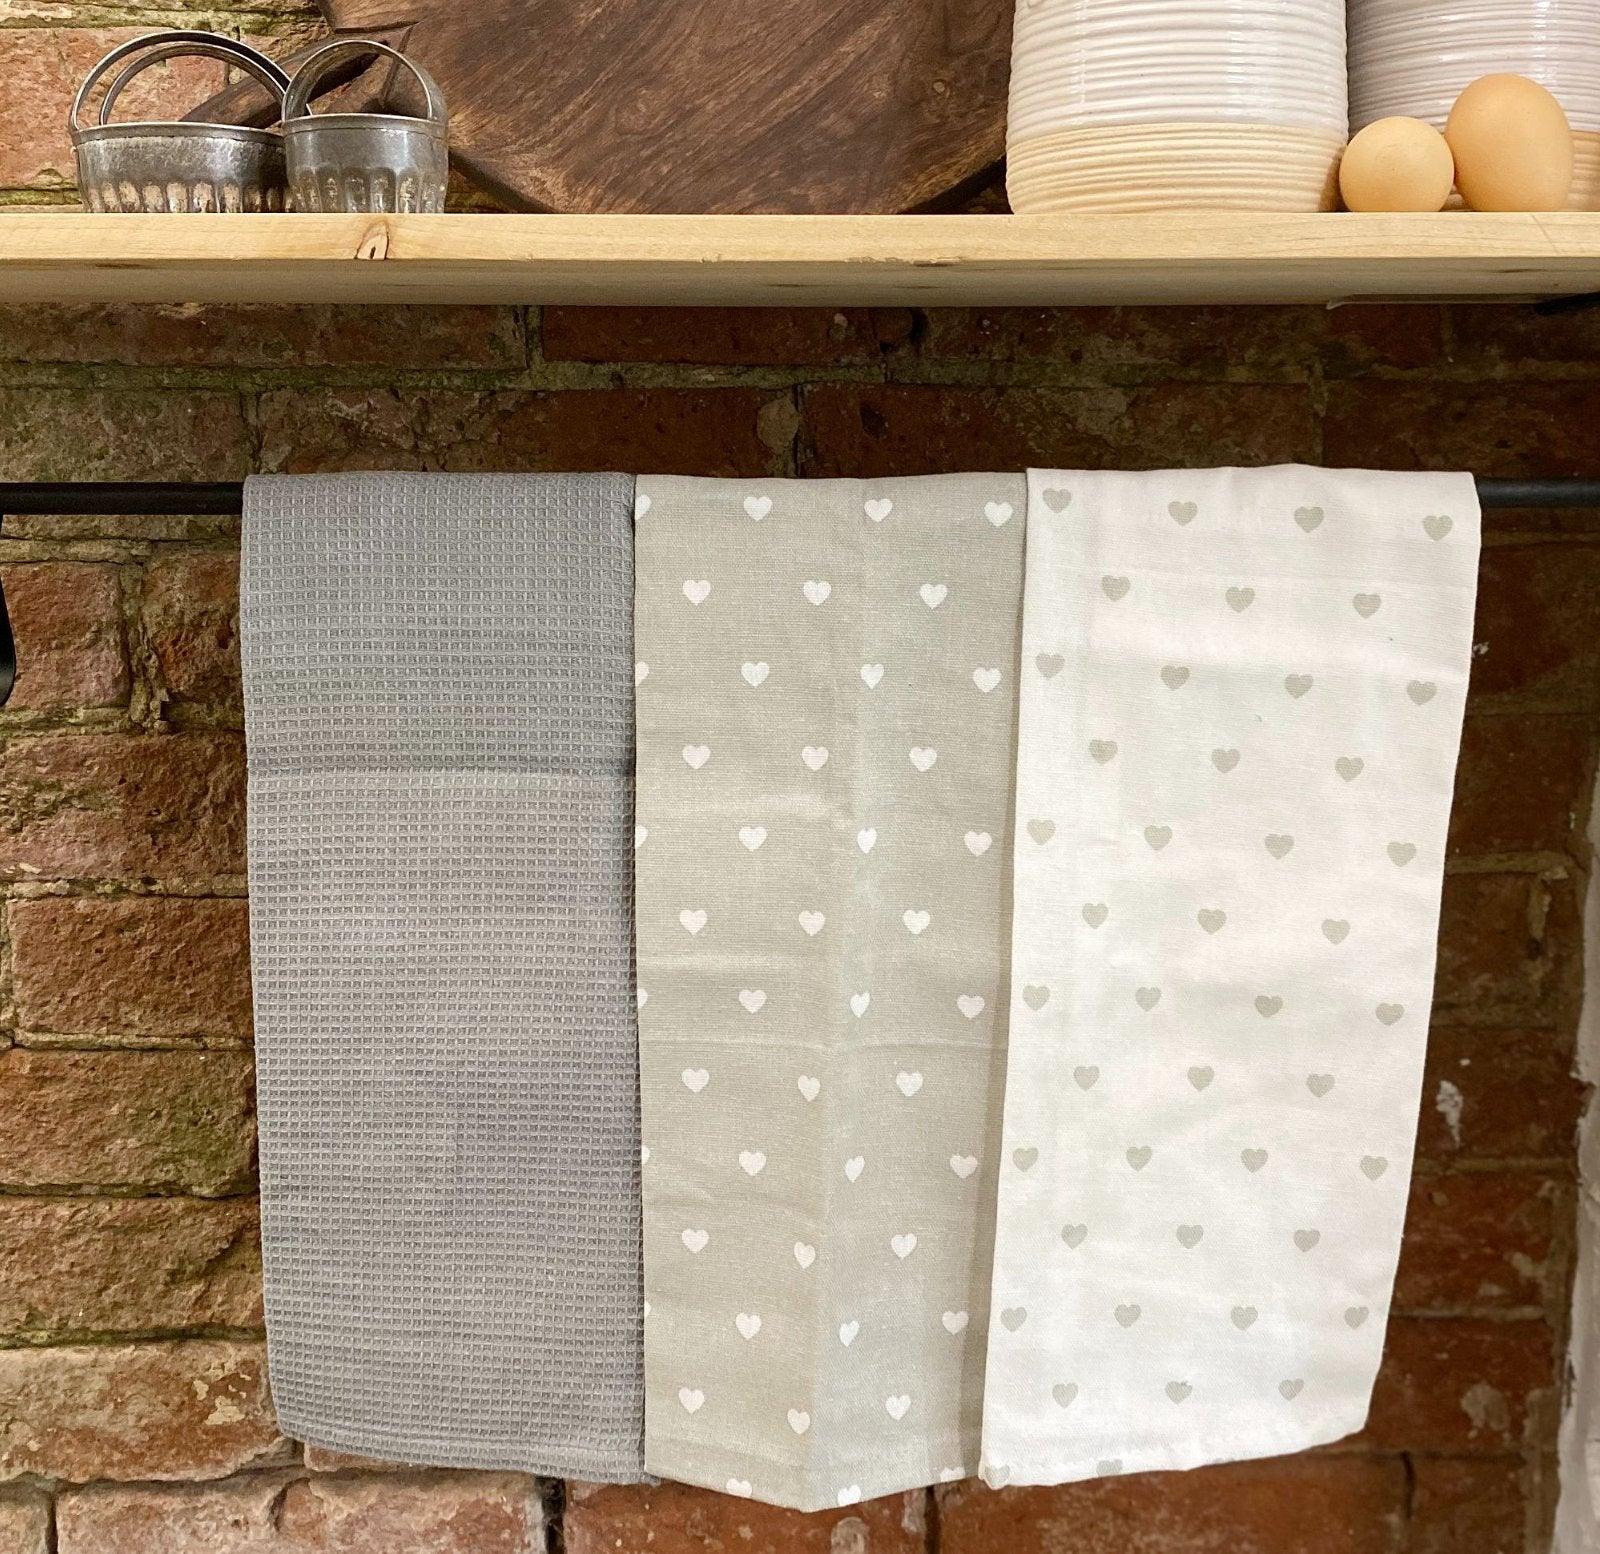 View Pack of 3 Kitchen Tea Towels With A Grey Heart Print Design information